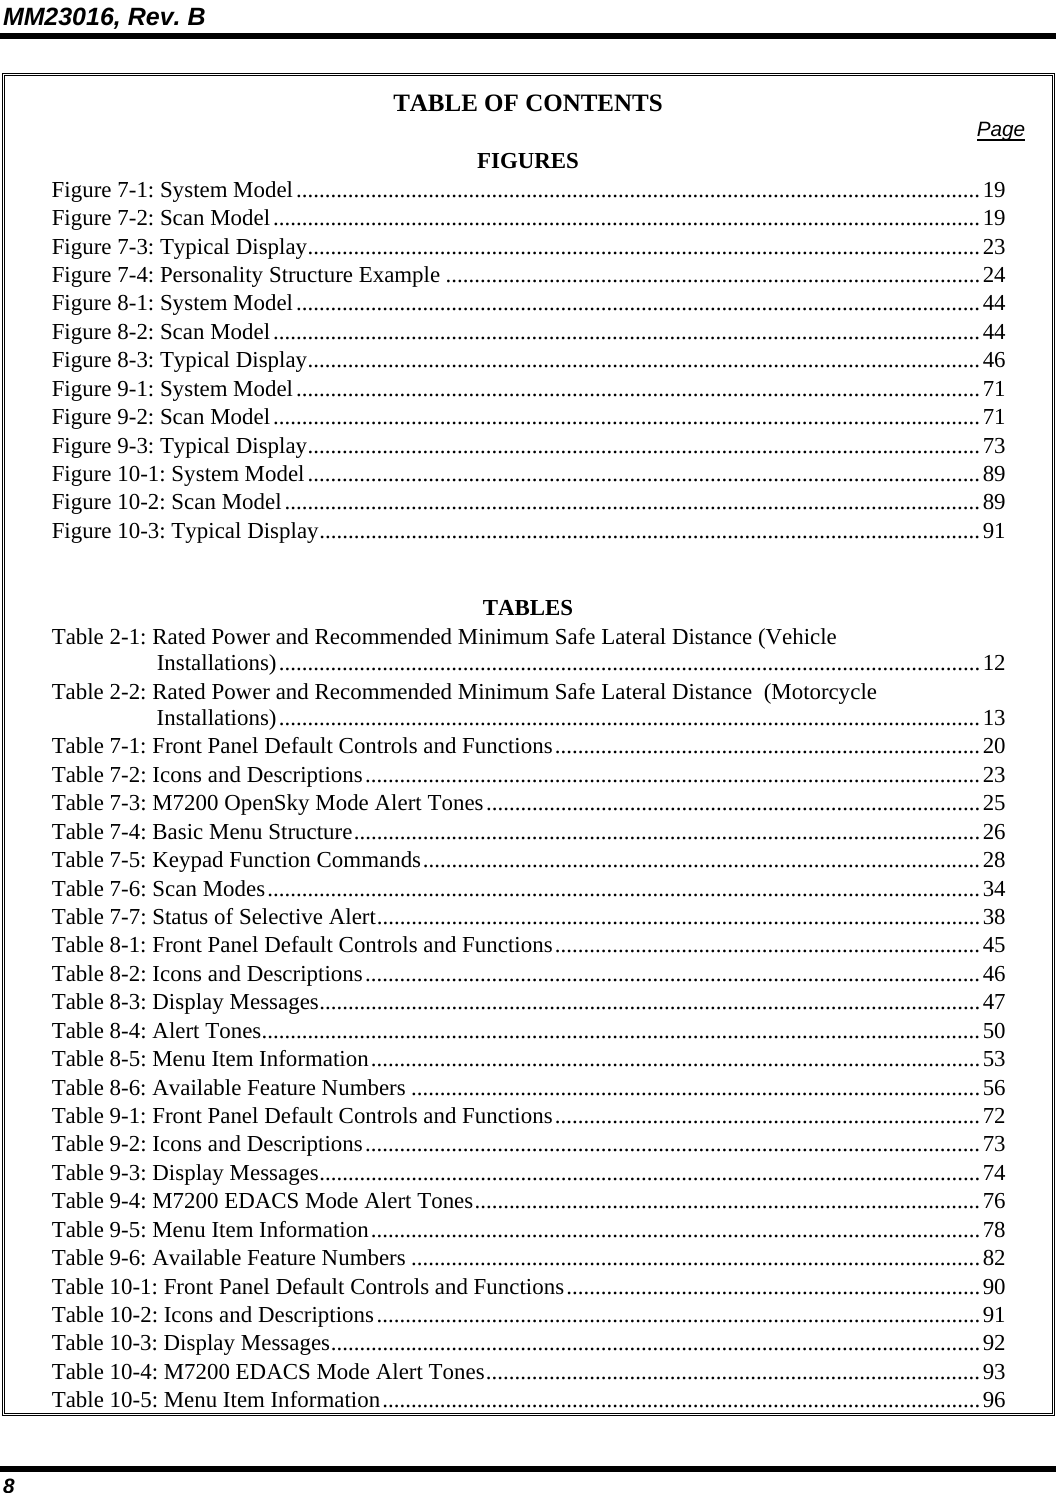 MM23016, Rev. B 8 TABLE OF CONTENTS  Page FIGURES Figure 7-1: System Model.......................................................................................................................19 Figure 7-2: Scan Model...........................................................................................................................19 Figure 7-3: Typical Display.....................................................................................................................23 Figure 7-4: Personality Structure Example .............................................................................................24 Figure 8-1: System Model.......................................................................................................................44 Figure 8-2: Scan Model...........................................................................................................................44 Figure 8-3: Typical Display.....................................................................................................................46 Figure 9-1: System Model.......................................................................................................................71 Figure 9-2: Scan Model...........................................................................................................................71 Figure 9-3: Typical Display.....................................................................................................................73 Figure 10-1: System Model.....................................................................................................................89 Figure 10-2: Scan Model.........................................................................................................................89 Figure 10-3: Typical Display...................................................................................................................91   TABLES Table 2-1: Rated Power and Recommended Minimum Safe Lateral Distance (Vehicle Installations)..........................................................................................................................12 Table 2-2: Rated Power and Recommended Minimum Safe Lateral Distance  (Motorcycle Installations)..........................................................................................................................13 Table 7-1: Front Panel Default Controls and Functions..........................................................................20 Table 7-2: Icons and Descriptions...........................................................................................................23 Table 7-3: M7200 OpenSky Mode Alert Tones......................................................................................25 Table 7-4: Basic Menu Structure.............................................................................................................26 Table 7-5: Keypad Function Commands.................................................................................................28 Table 7-6: Scan Modes............................................................................................................................34 Table 7-7: Status of Selective Alert.........................................................................................................38 Table 8-1: Front Panel Default Controls and Functions..........................................................................45 Table 8-2: Icons and Descriptions...........................................................................................................46 Table 8-3: Display Messages...................................................................................................................47 Table 8-4: Alert Tones.............................................................................................................................50 Table 8-5: Menu Item Information..........................................................................................................53 Table 8-6: Available Feature Numbers ...................................................................................................56 Table 9-1: Front Panel Default Controls and Functions..........................................................................72 Table 9-2: Icons and Descriptions...........................................................................................................73 Table 9-3: Display Messages...................................................................................................................74 Table 9-4: M7200 EDACS Mode Alert Tones........................................................................................76 Table 9-5: Menu Item Information..........................................................................................................78 Table 9-6: Available Feature Numbers ...................................................................................................82 Table 10-1: Front Panel Default Controls and Functions........................................................................90 Table 10-2: Icons and Descriptions.........................................................................................................91 Table 10-3: Display Messages.................................................................................................................92 Table 10-4: M7200 EDACS Mode Alert Tones......................................................................................93 Table 10-5: Menu Item Information........................................................................................................96 